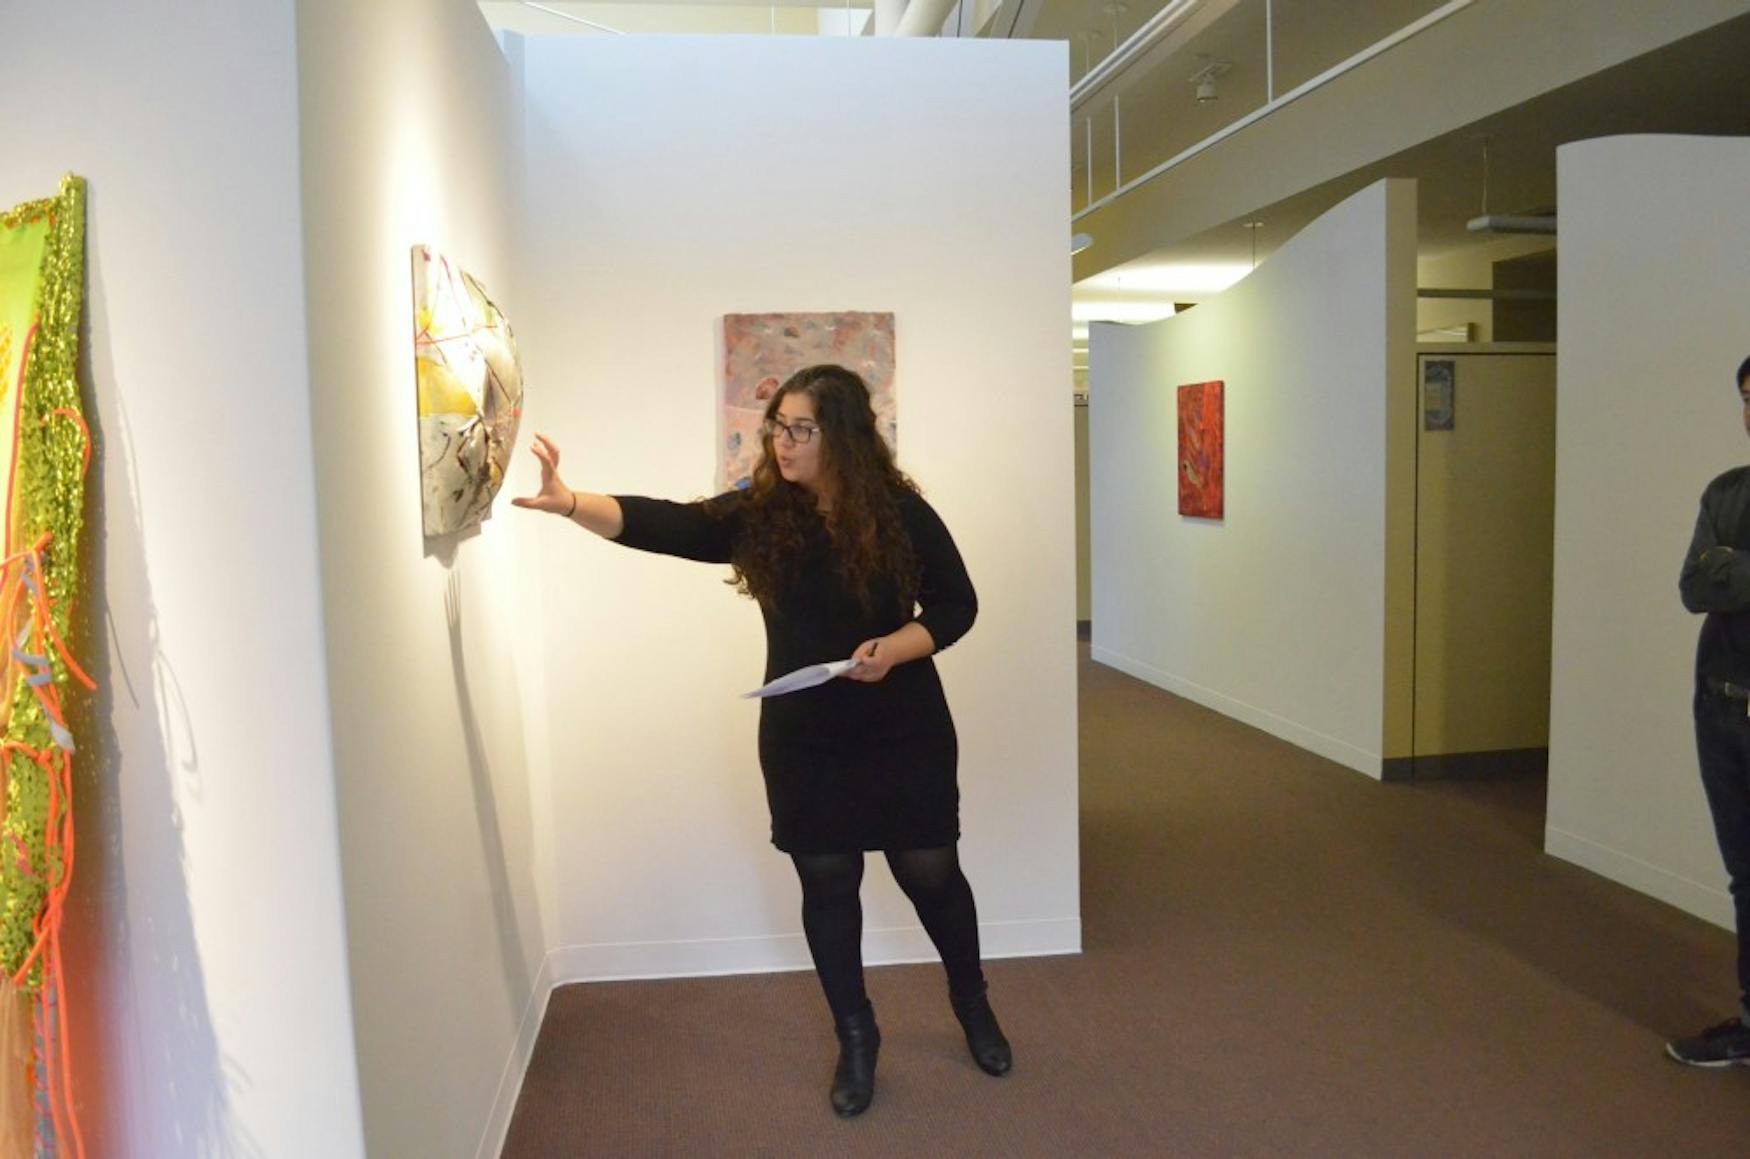 CRAFT OF CORPOREALITY: Damiana Andonova ’15, Women’s Studies Reserach Center arts assistant, led a talk about medical humanities, looking at the Leeza Meksin exhibit, Big Bounce.